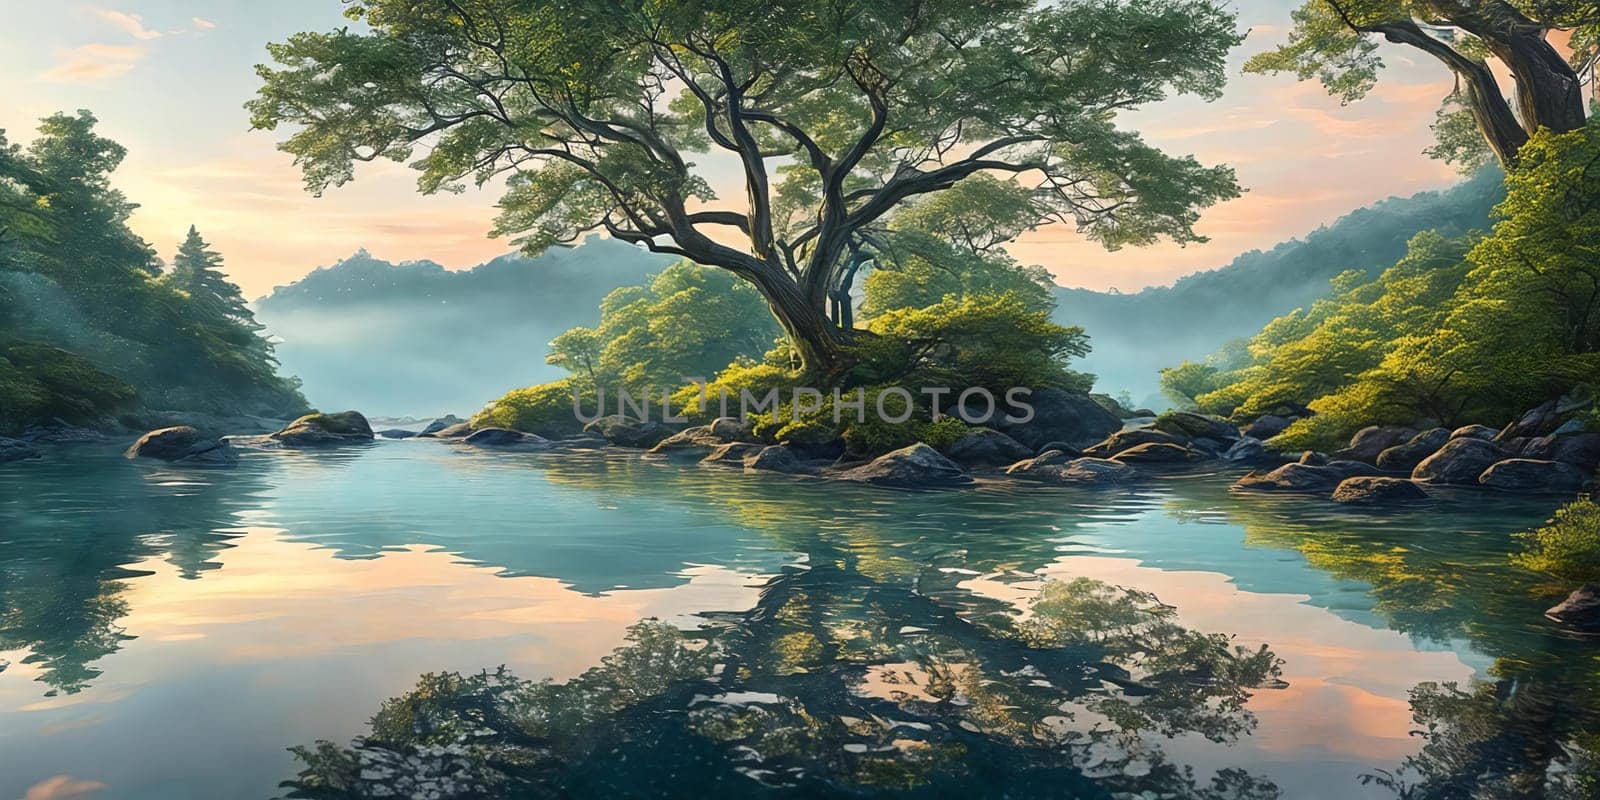 A breathtaking scene at dusk. Serene mountain forest by a glittering lake with a tent pitched